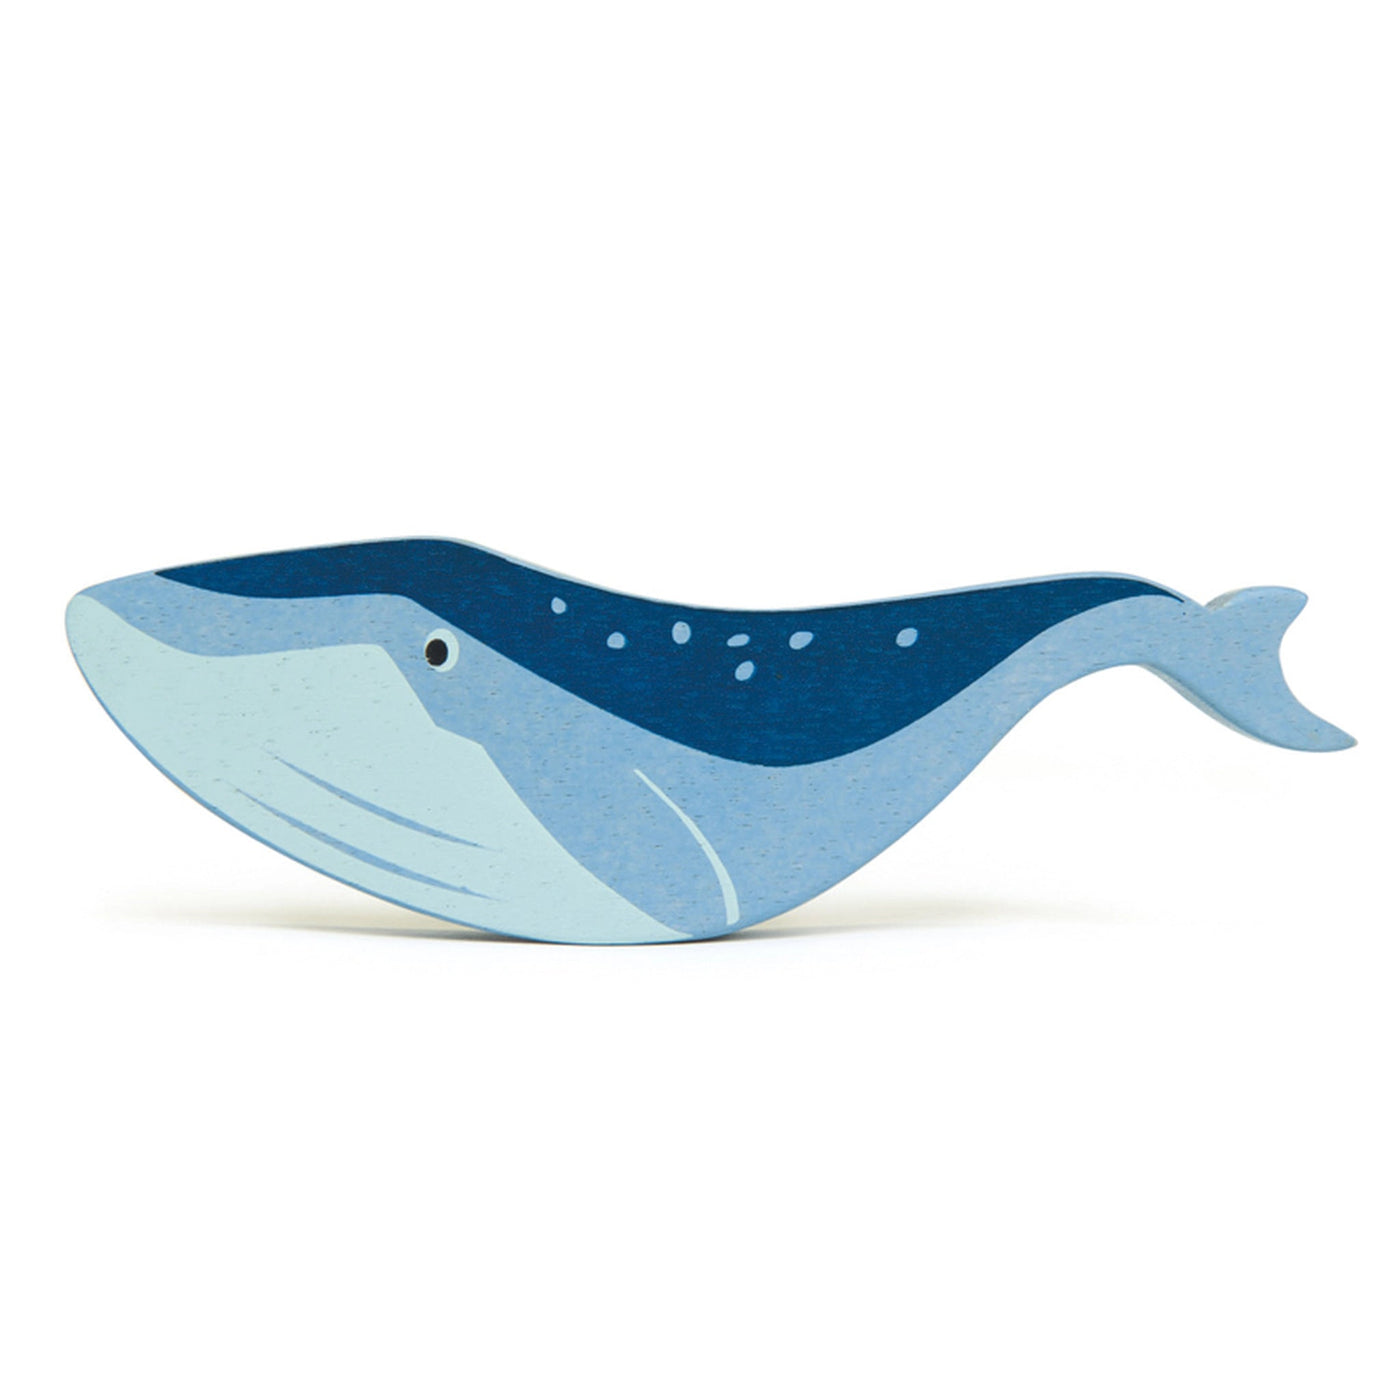 Coastal Wooden Animal Wooden Toy Tender Leaf Toys Whale 